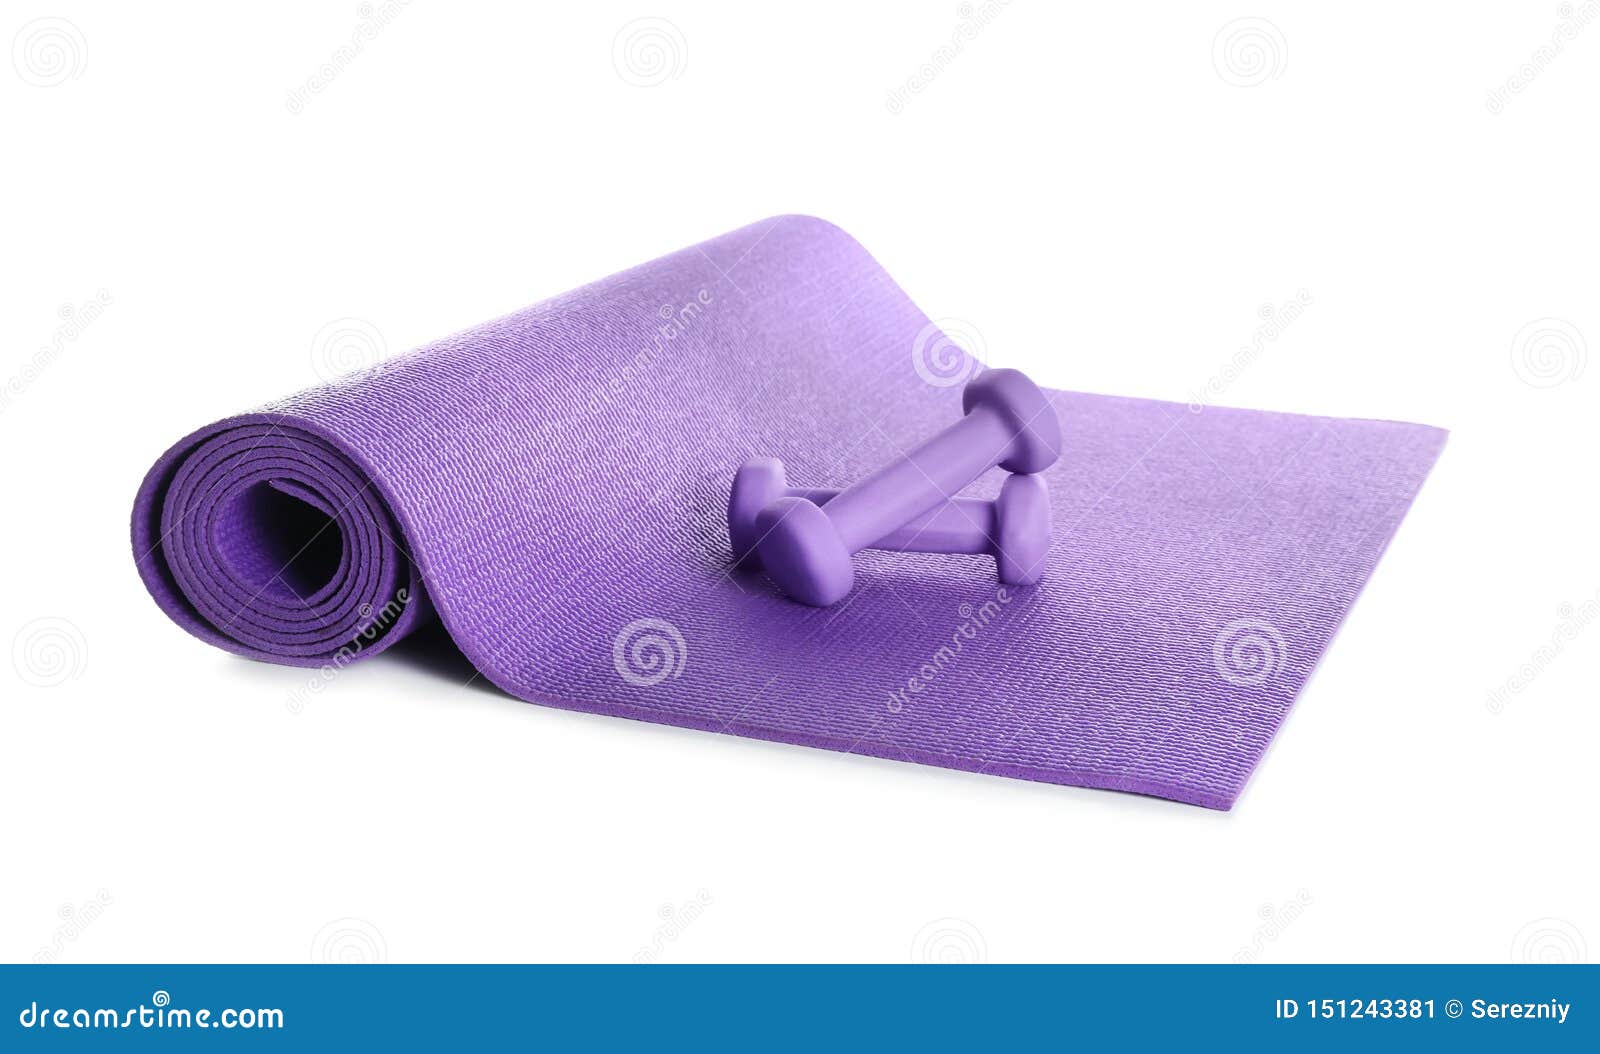 Color Yoga Mat with Dumbbells on White Background Stock Image - Image ...